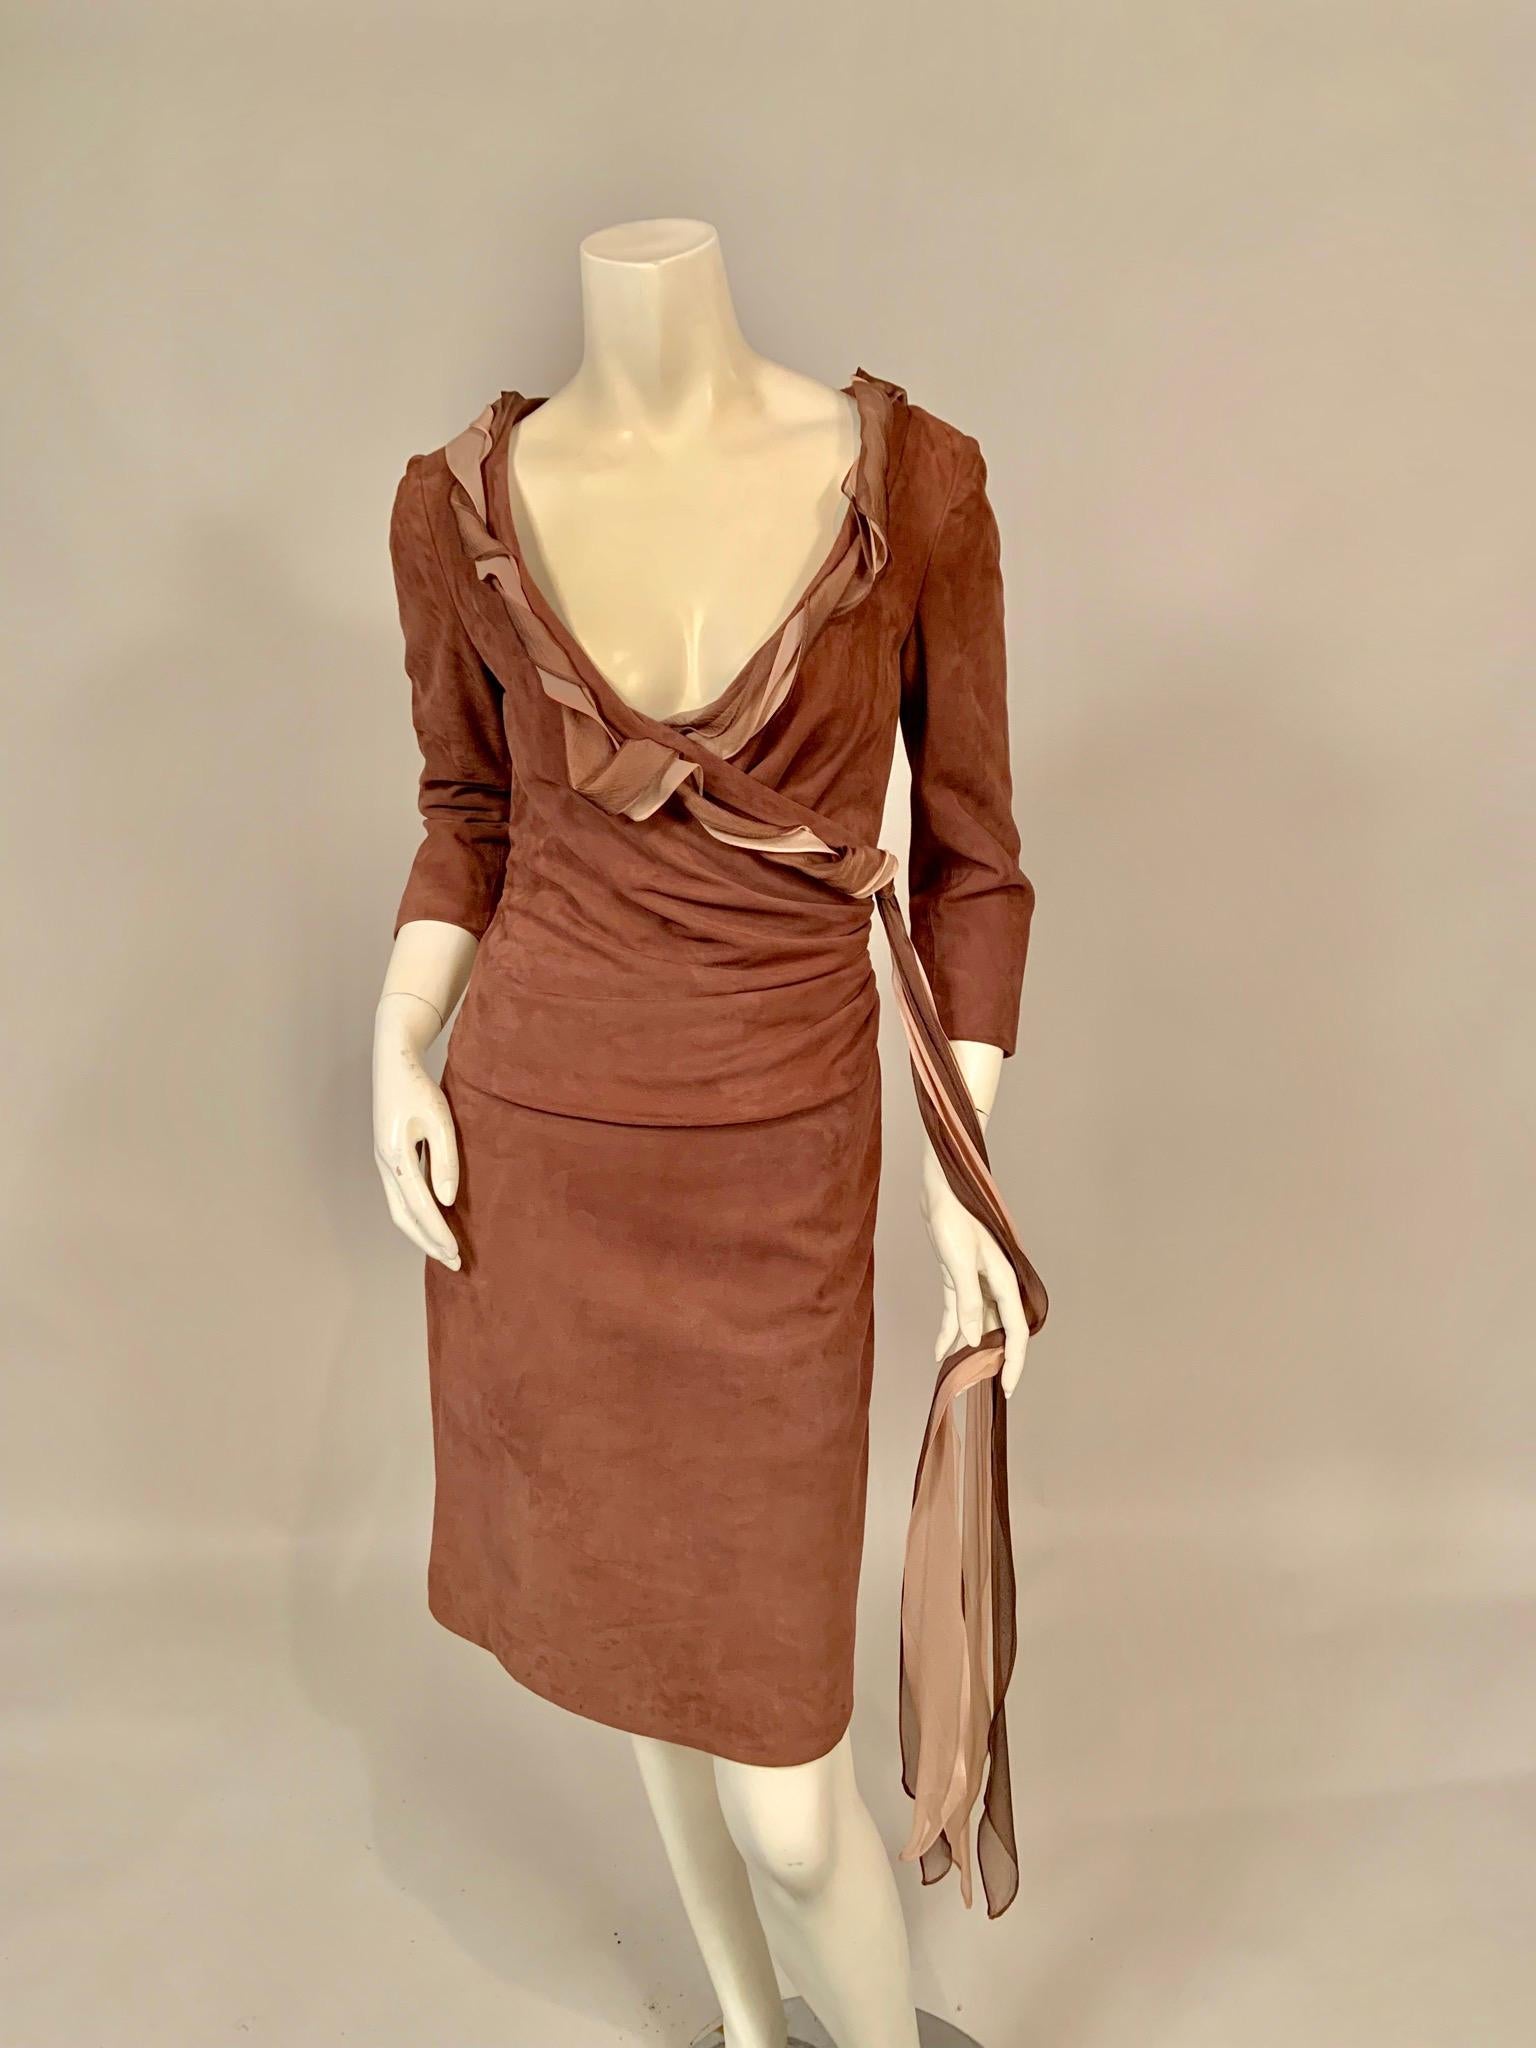 This is a most glamorous suede dress, with a low neckline and a faux wrap design edged with silk chiffon with long chiffon streamers. The dress has three quarter sleeves and a right side invisible zipper. It is fully lined in pale pink silk